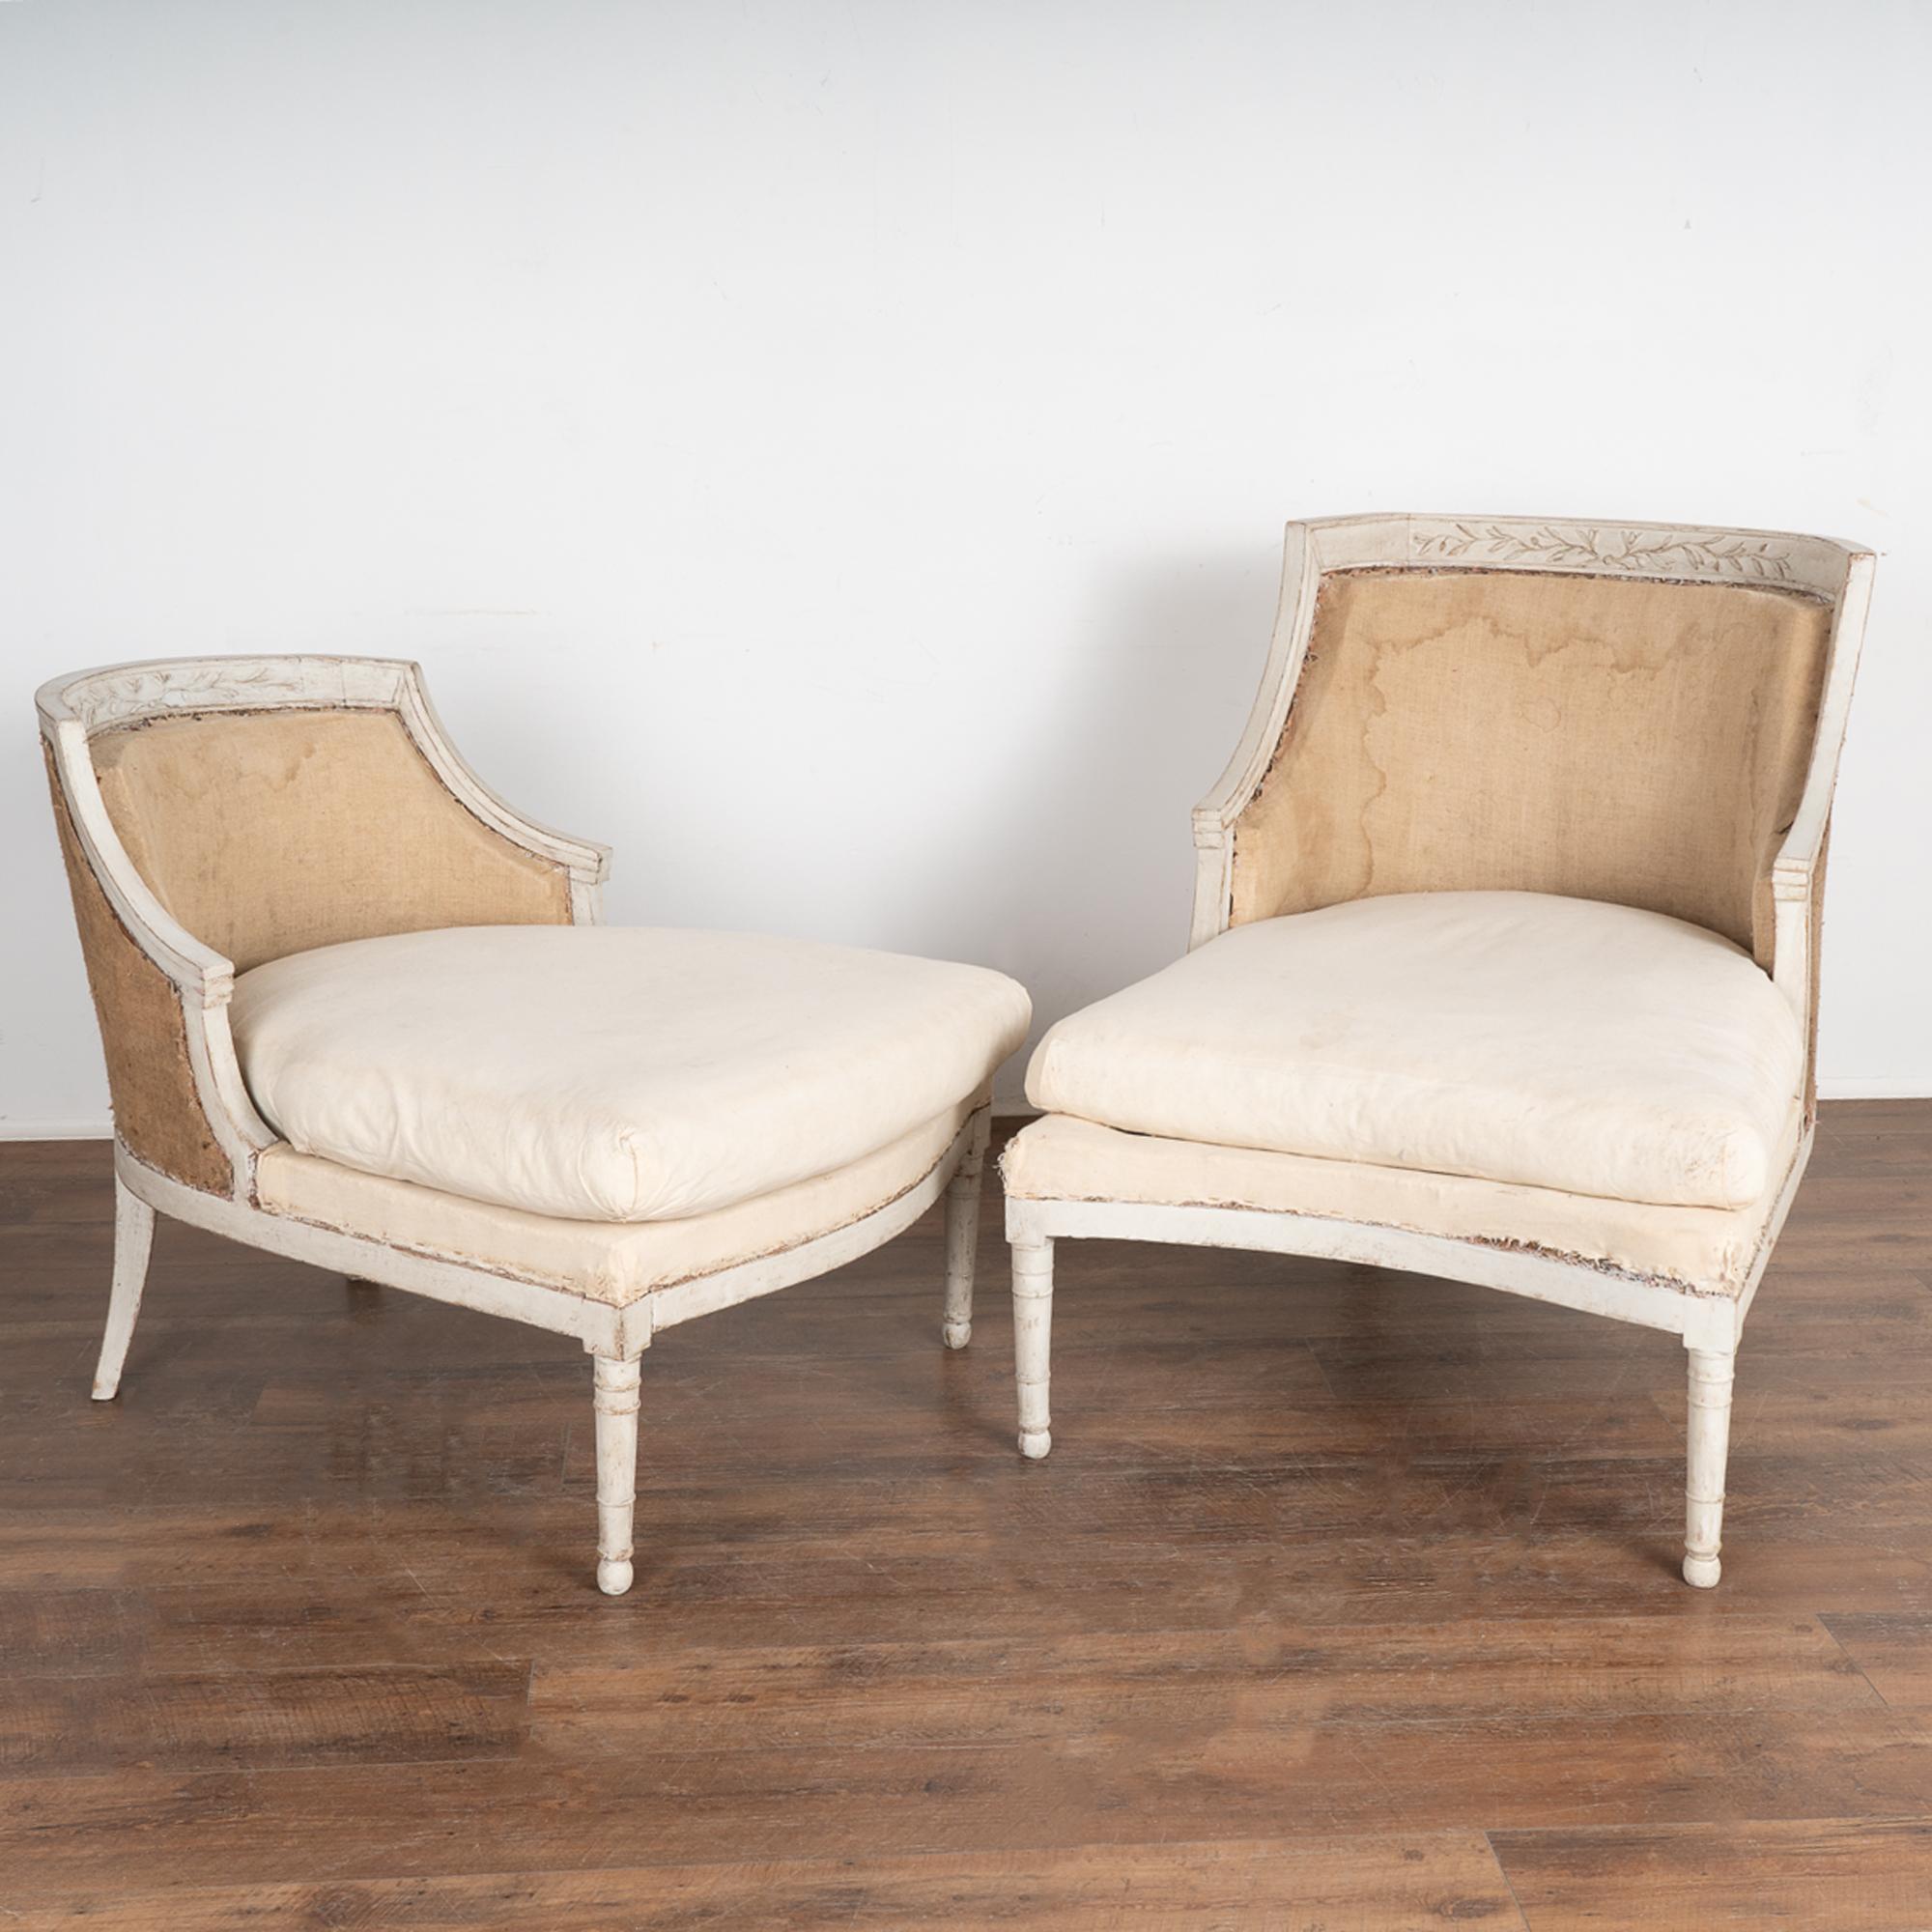 19th Century Pair, Swedish Gustavian Arm Chairs, Together Form Settee or Sofa, circa 1840